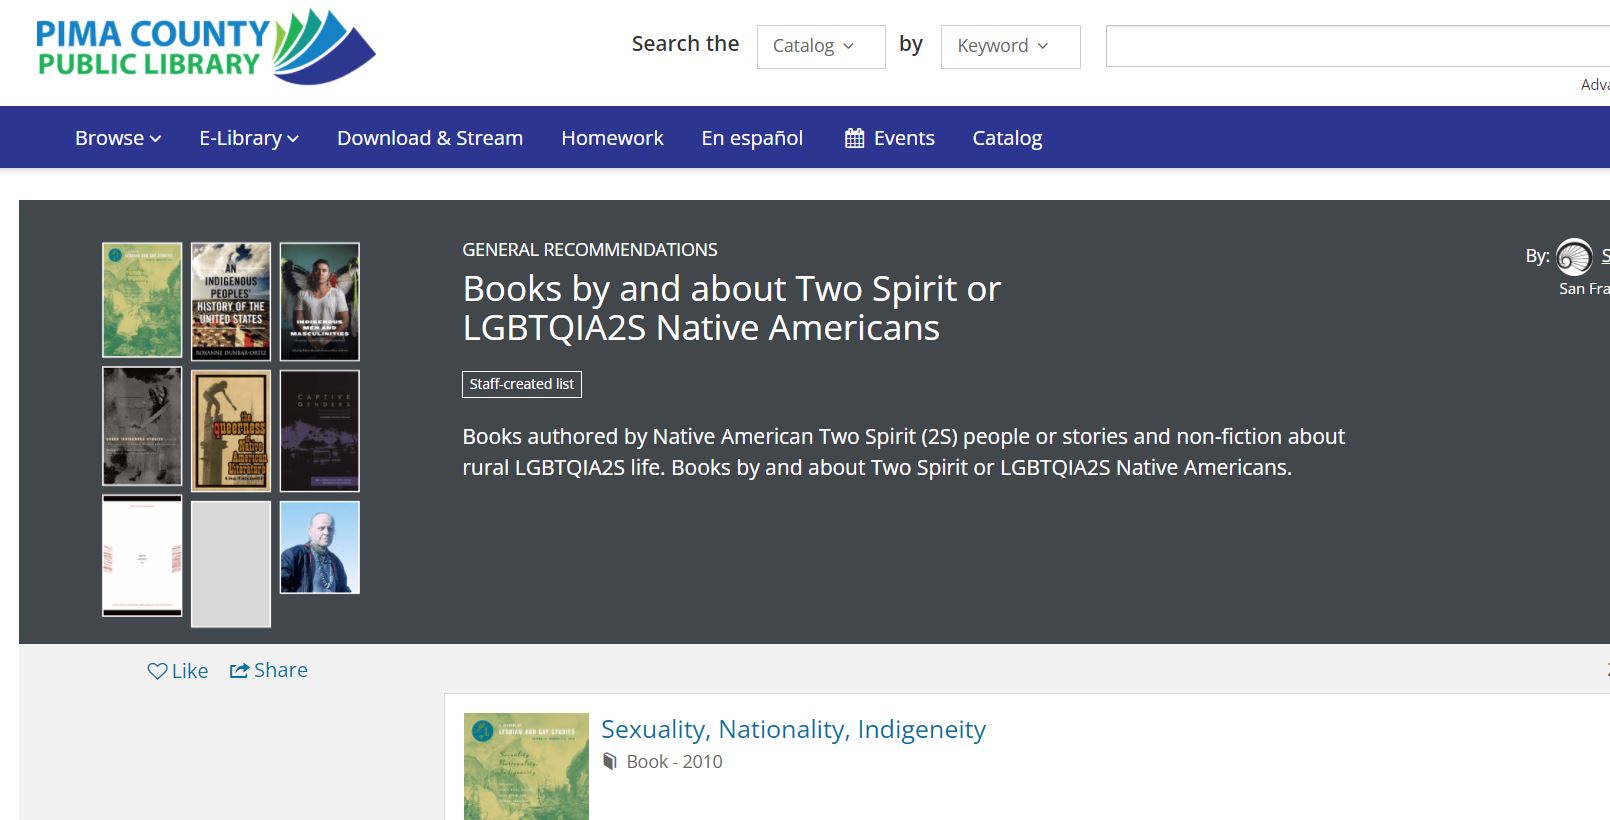 Books by and about Two Spirit or LGBTQIA2S Native Americans